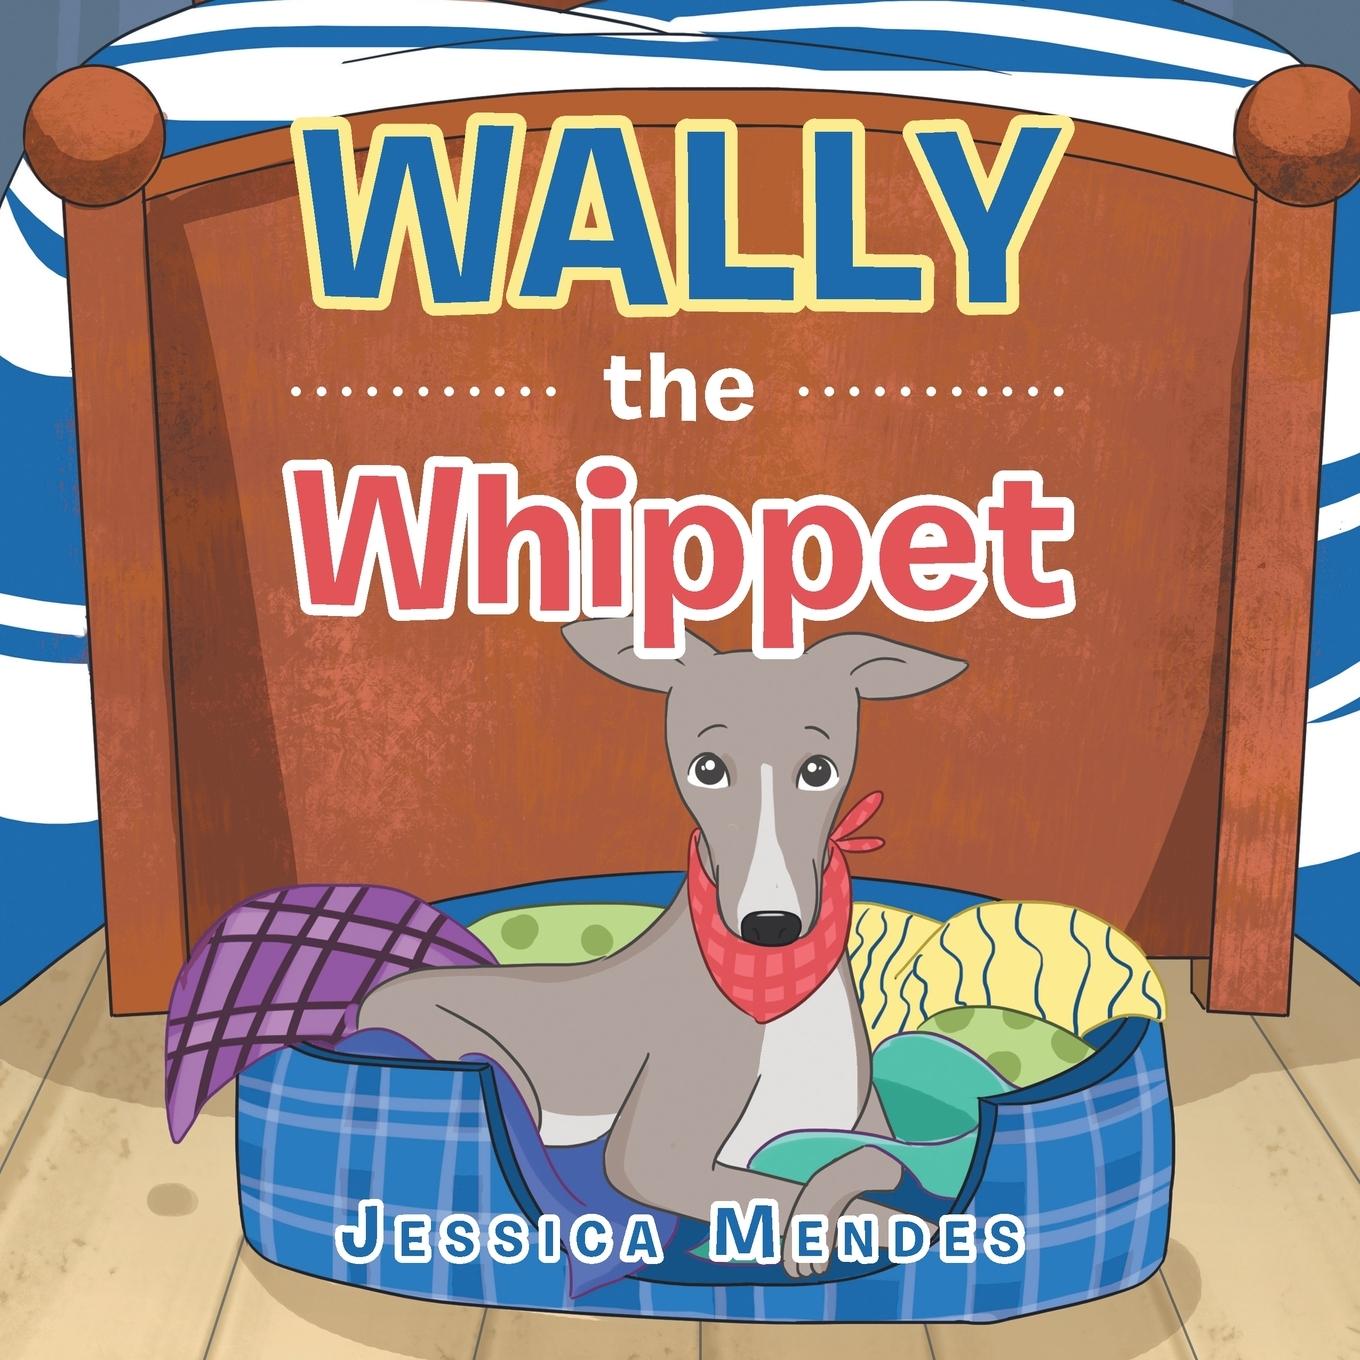 Book Wally the Whippet JESSICA MENDES